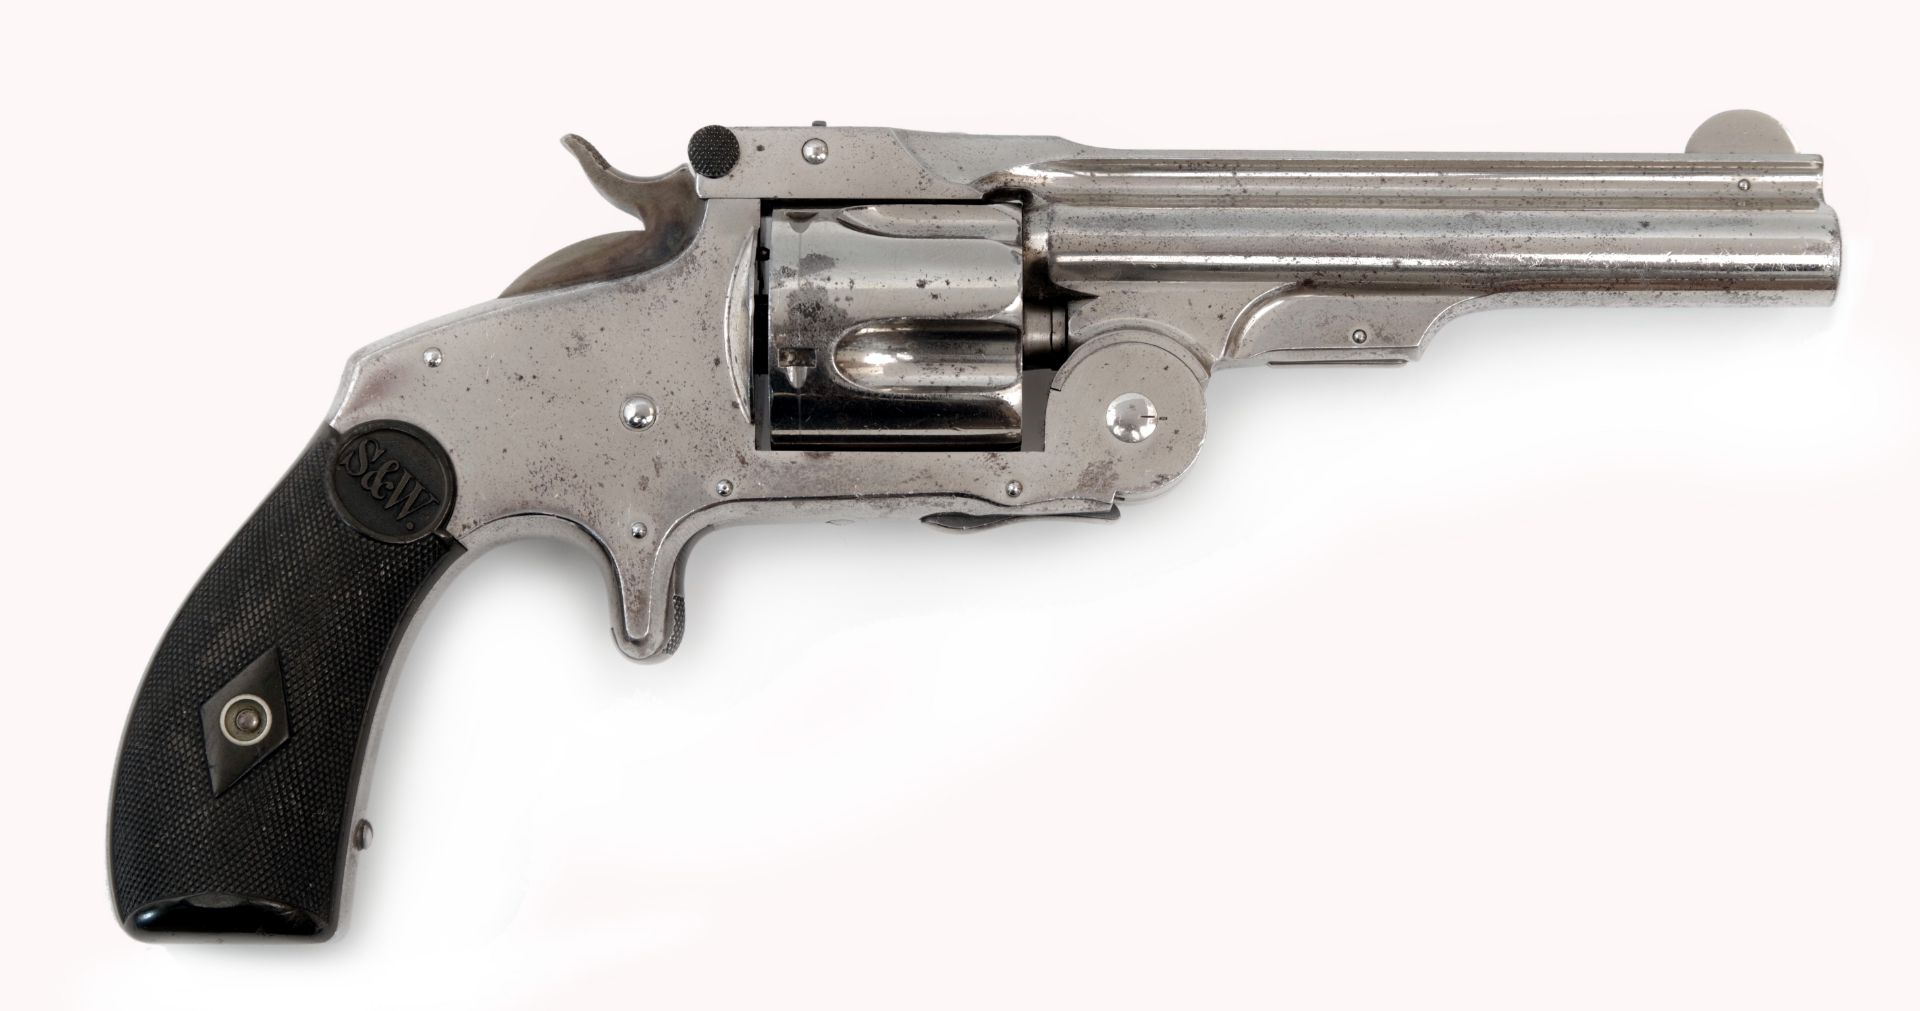 Smith & Wesson Baby Russian Revolver 38 S&W First Model - Image 2 of 3